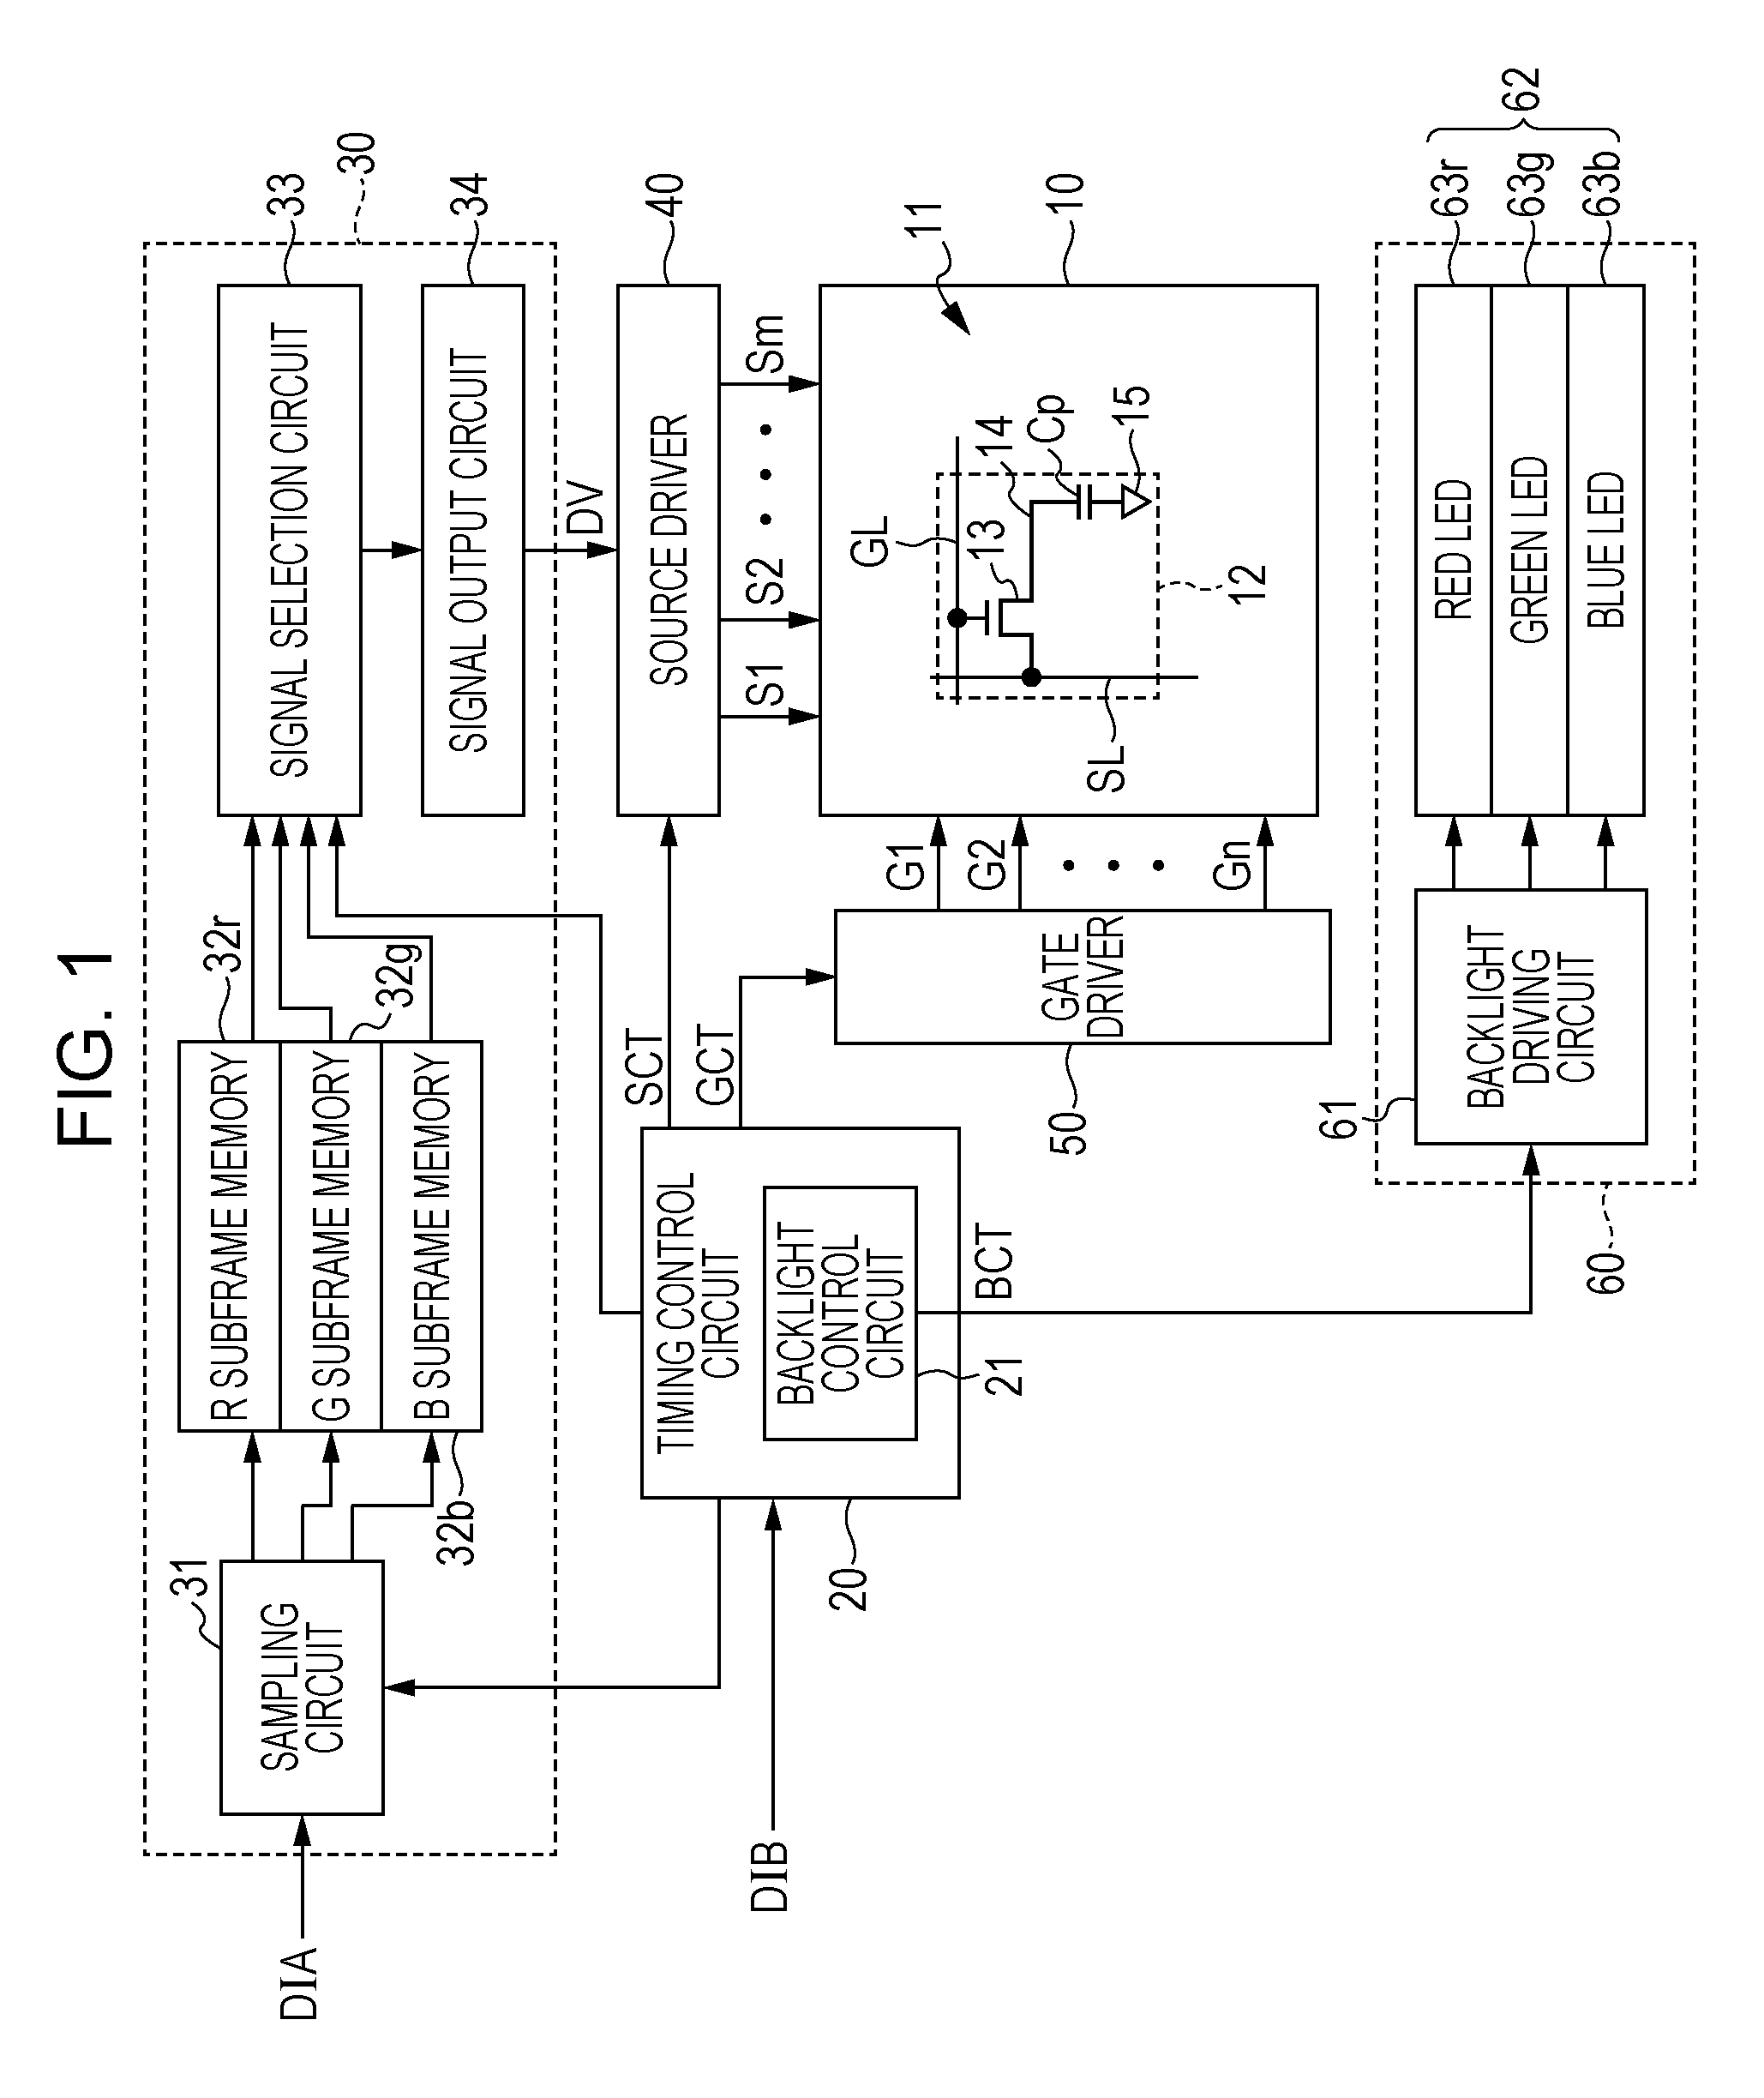 Display device and method that divides one frame period into a plurality of subframe periods and that displays screens of different colors in accordance with the subframe periods